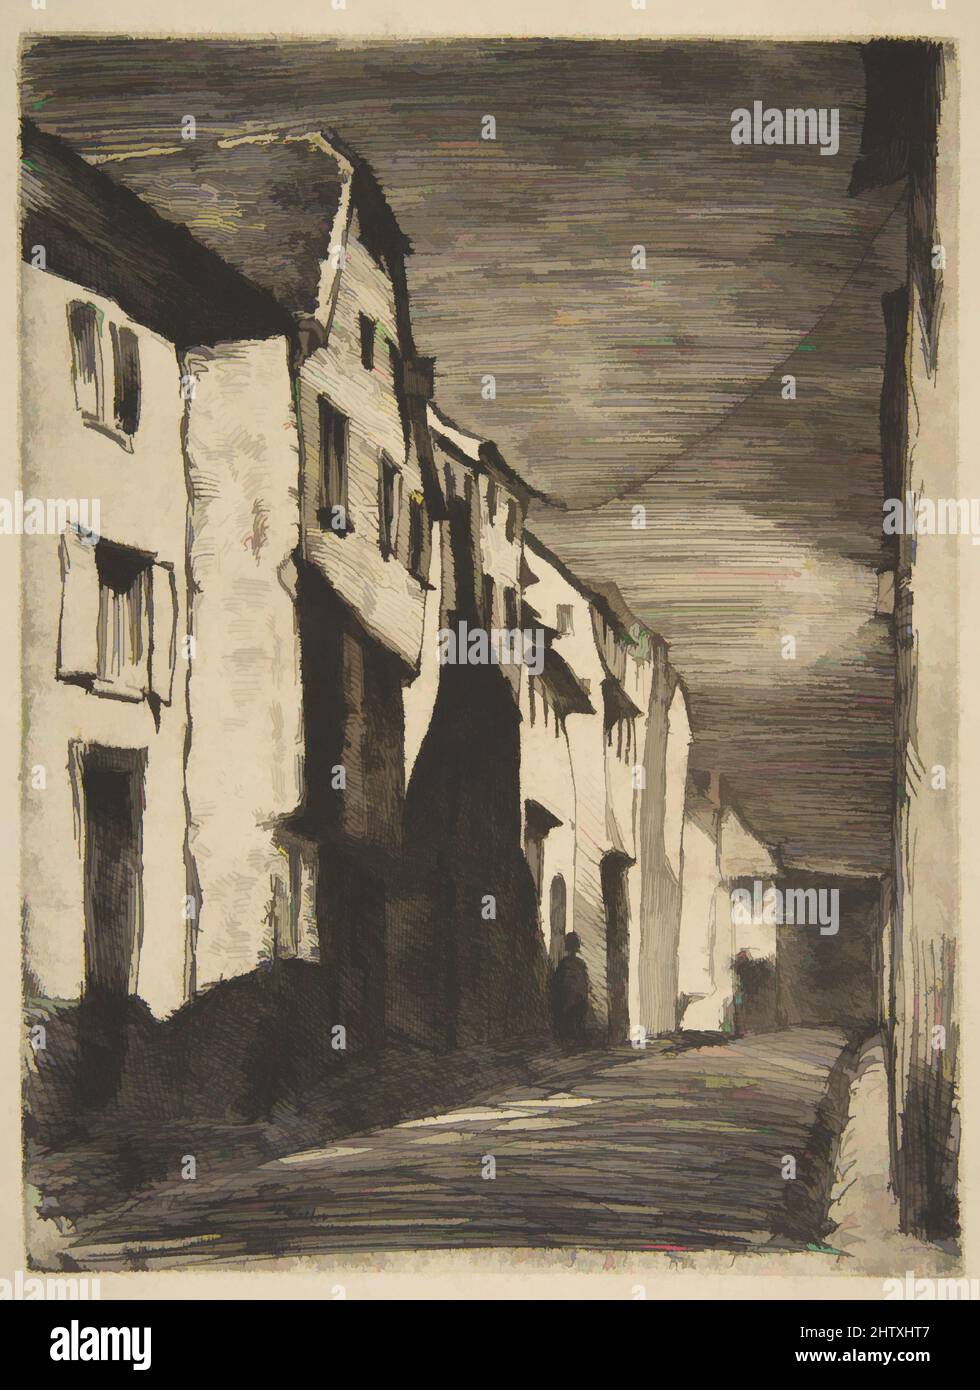 Art inspired by Street at Saverne, 1858, Etching; third state of four (Glasgow); printed in black ink on heavy pale gray textured paper with (faded) blue fibers, Plate: 8 1/8 × 6 1/8 in. (20.6 × 15.6 cm), Prints, James McNeill Whistler (American, Lowell, Massachusetts 1834–1903 London, Classic works modernized by Artotop with a splash of modernity. Shapes, color and value, eye-catching visual impact on art. Emotions through freedom of artworks in a contemporary way. A timeless message pursuing a wildly creative new direction. Artists turning to the digital medium and creating the Artotop NFT Stock Photo